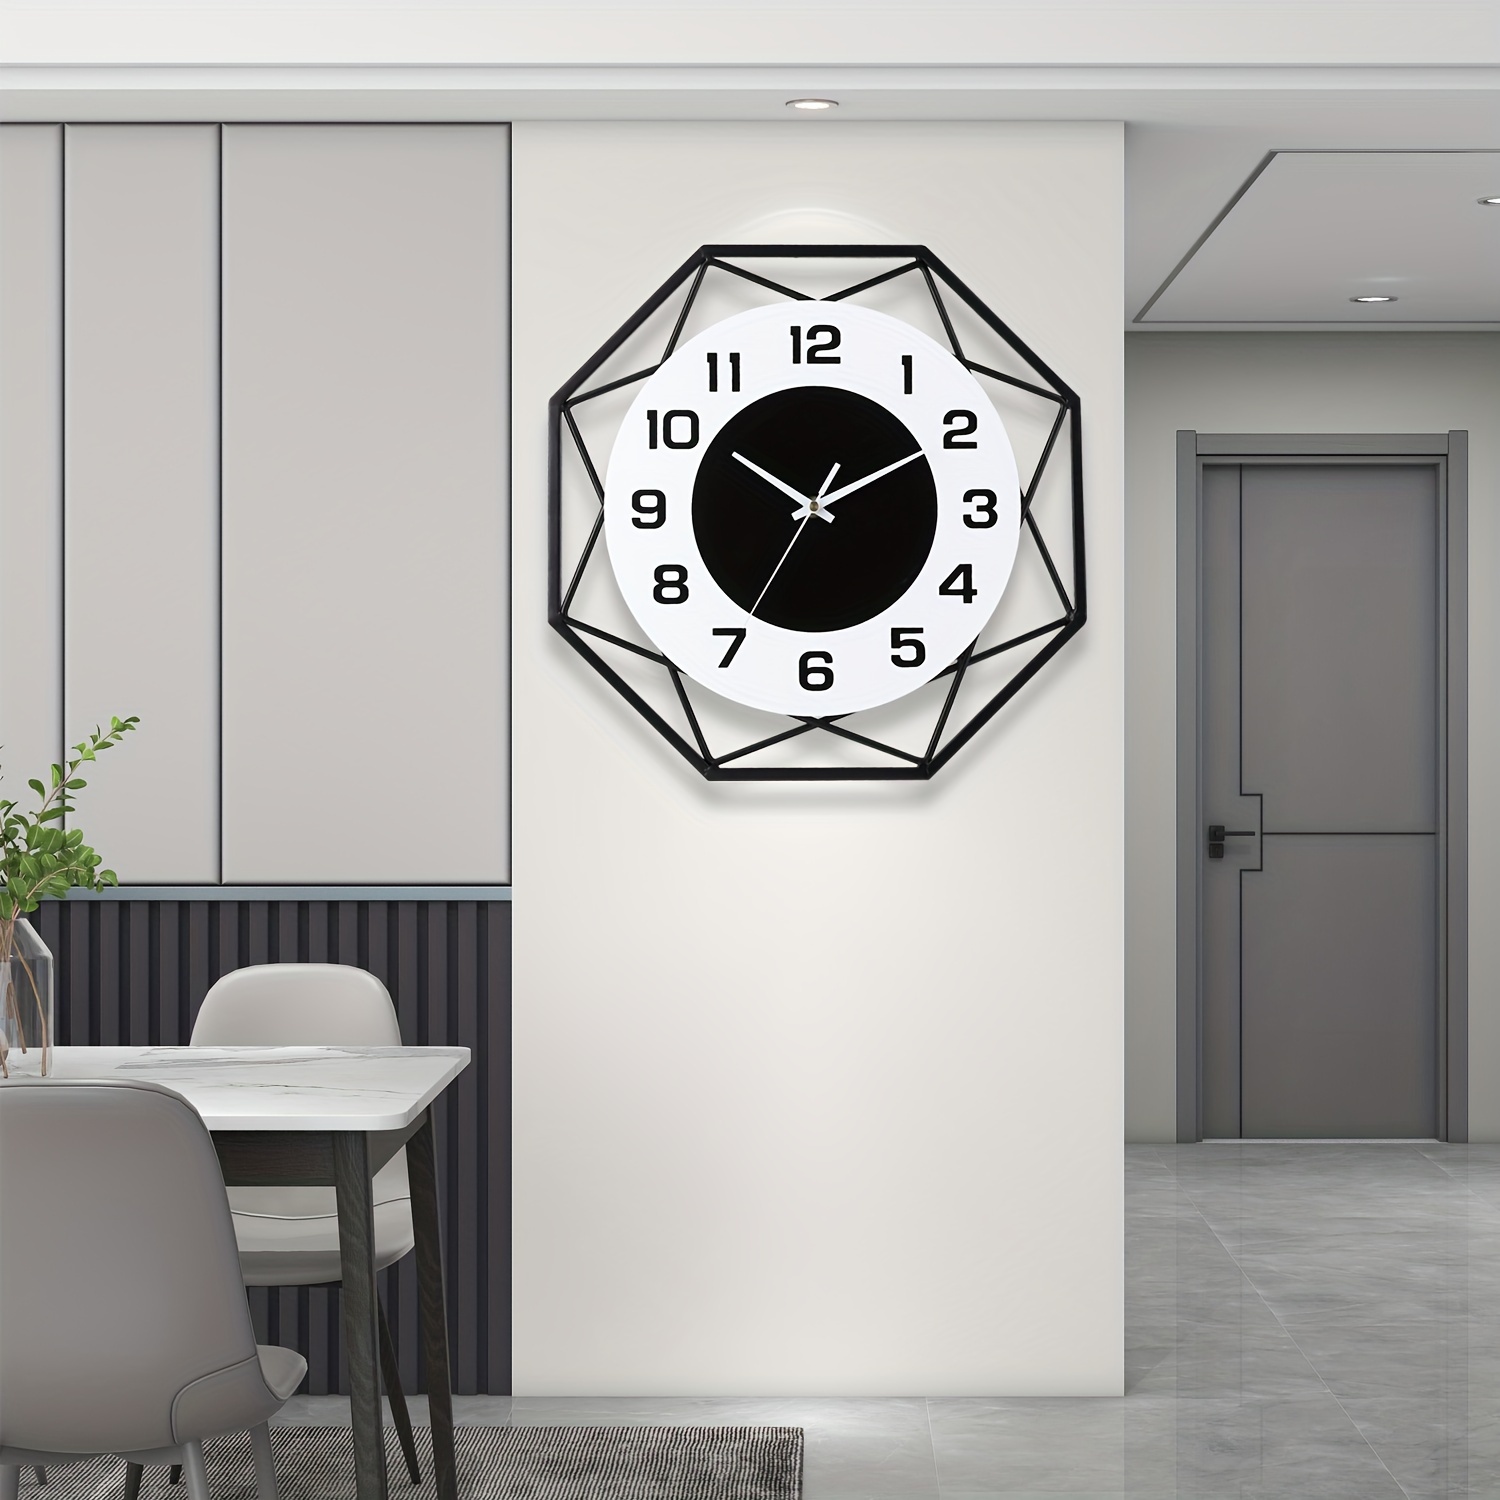 

Wall Clock For Living Room Decor, (33cm) 13inch Wall Clock Decorative, Metal Analog Roman Numeral Wall Clock Modern Wall Clocks - Large Clock Home Decor (black)